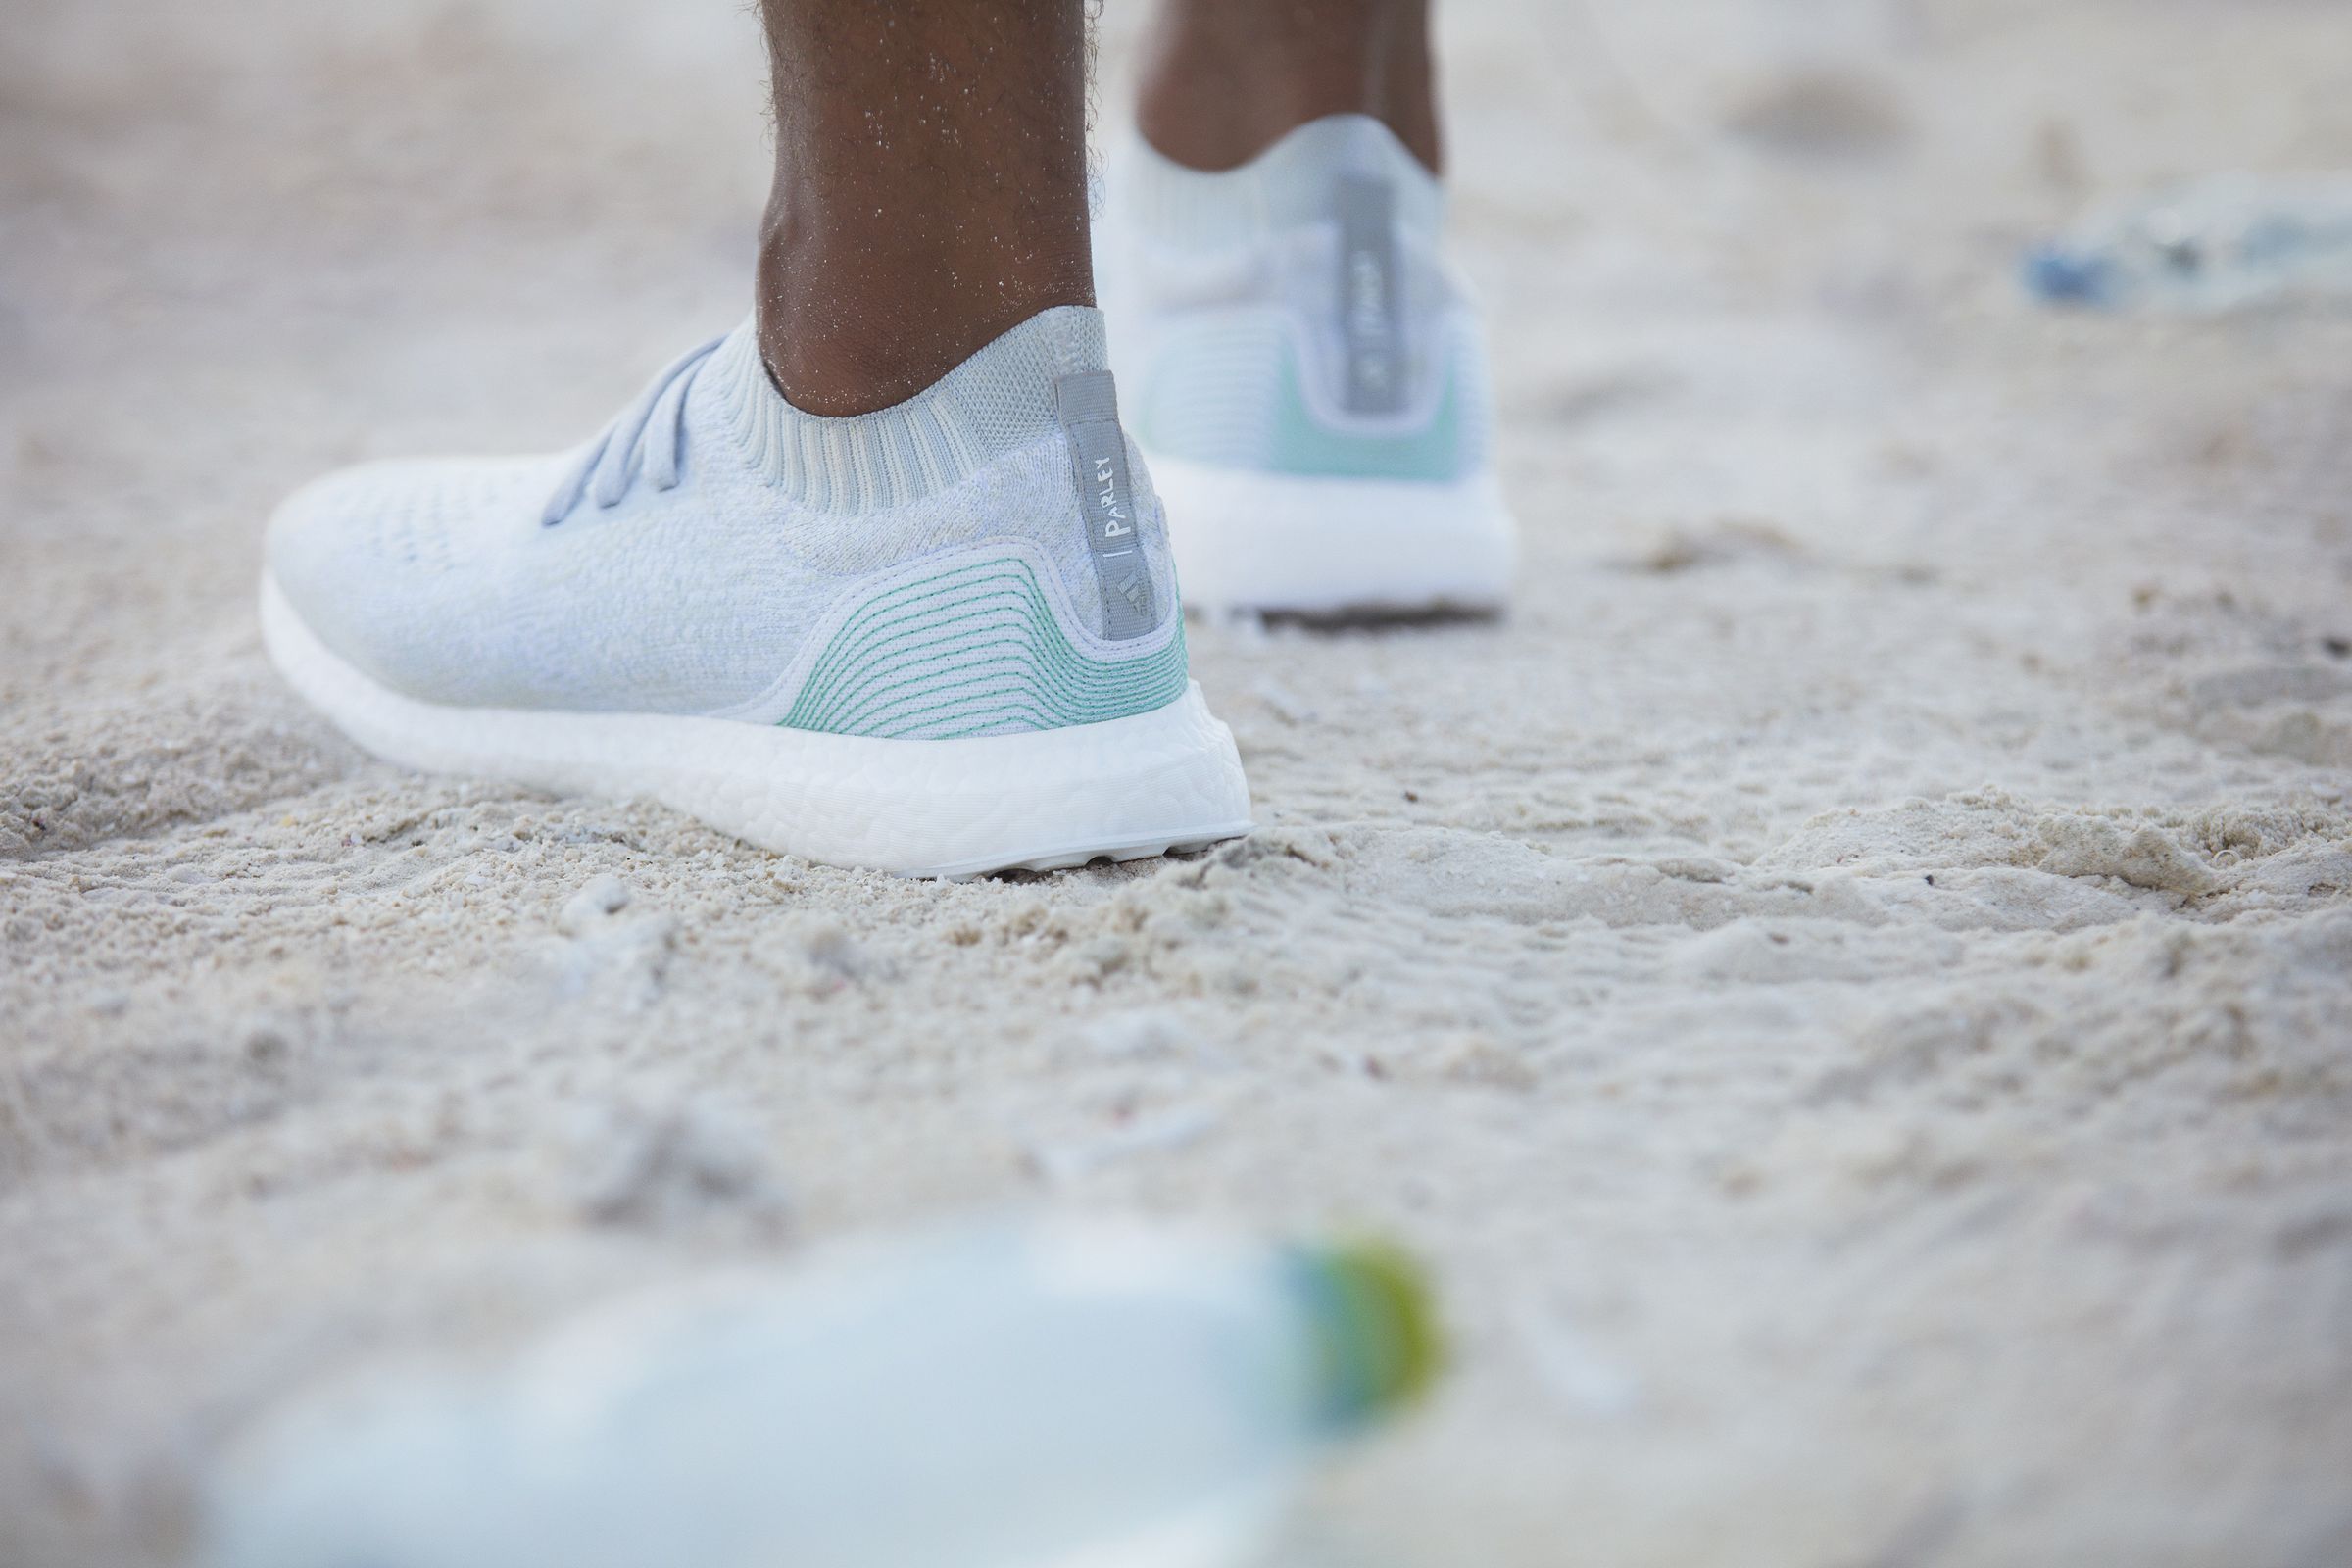 Each pair of sneakers is made from 11 recycled plastic bottles.